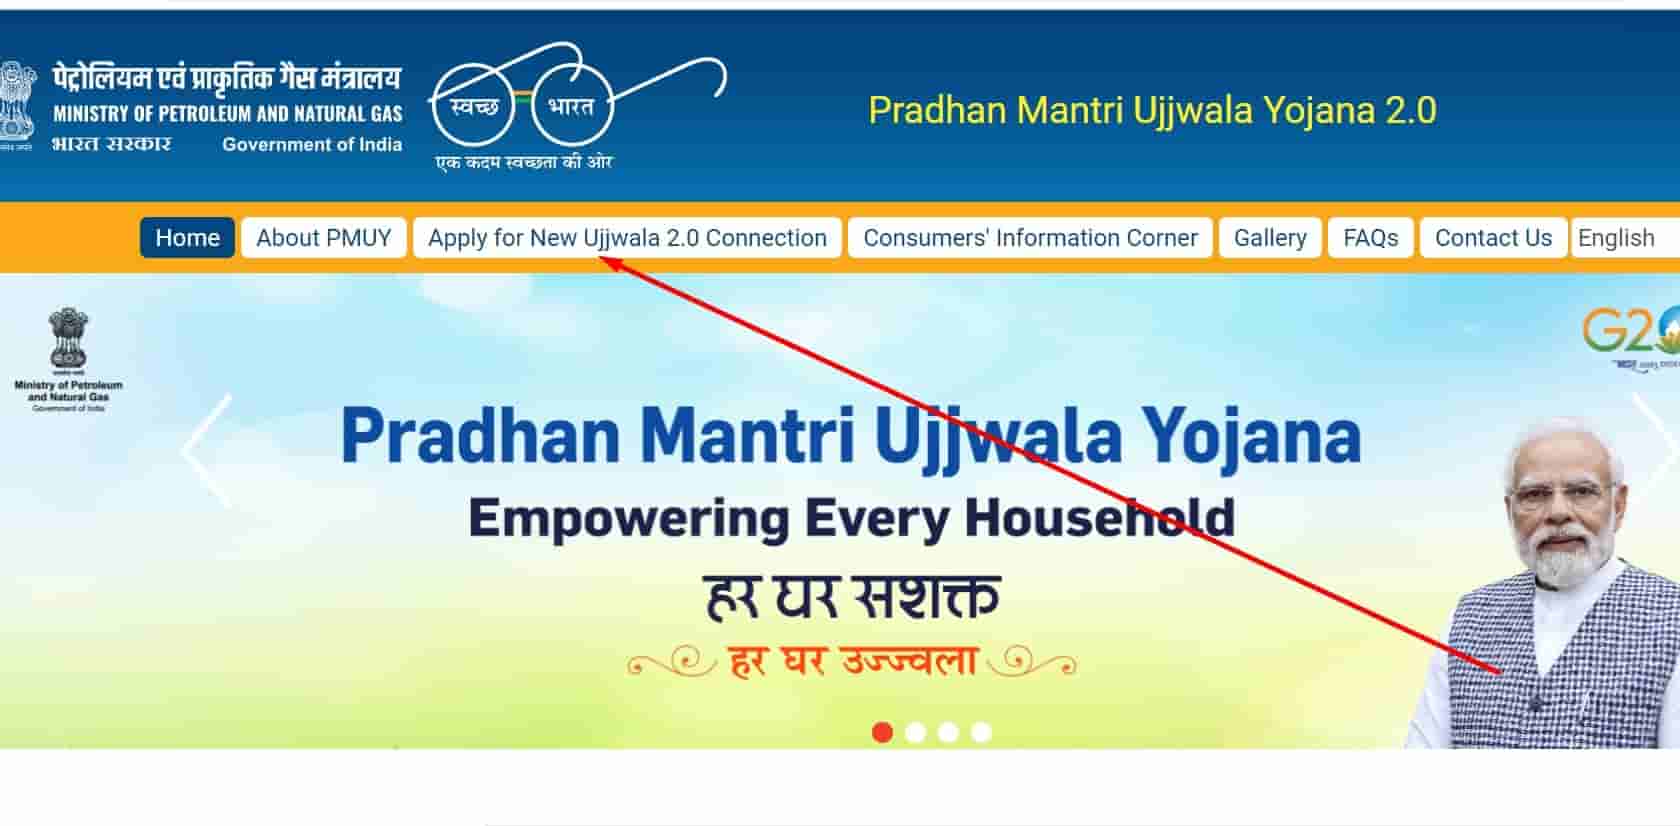 Apply For New Ujjwala 2.0 Connection